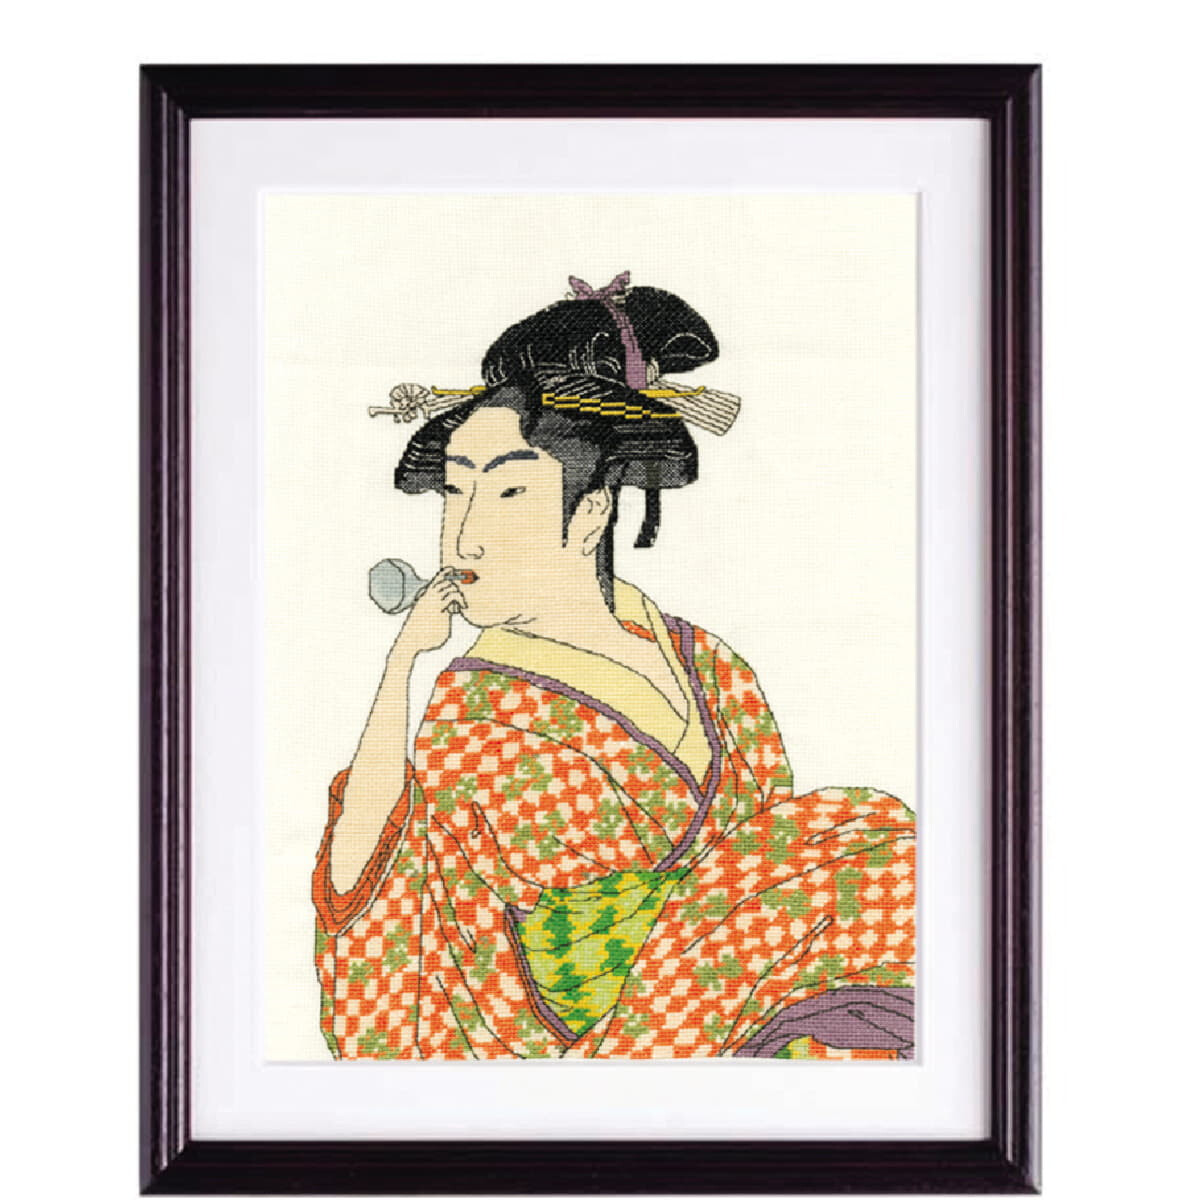 A framed work of art that resembles classic Japanese...